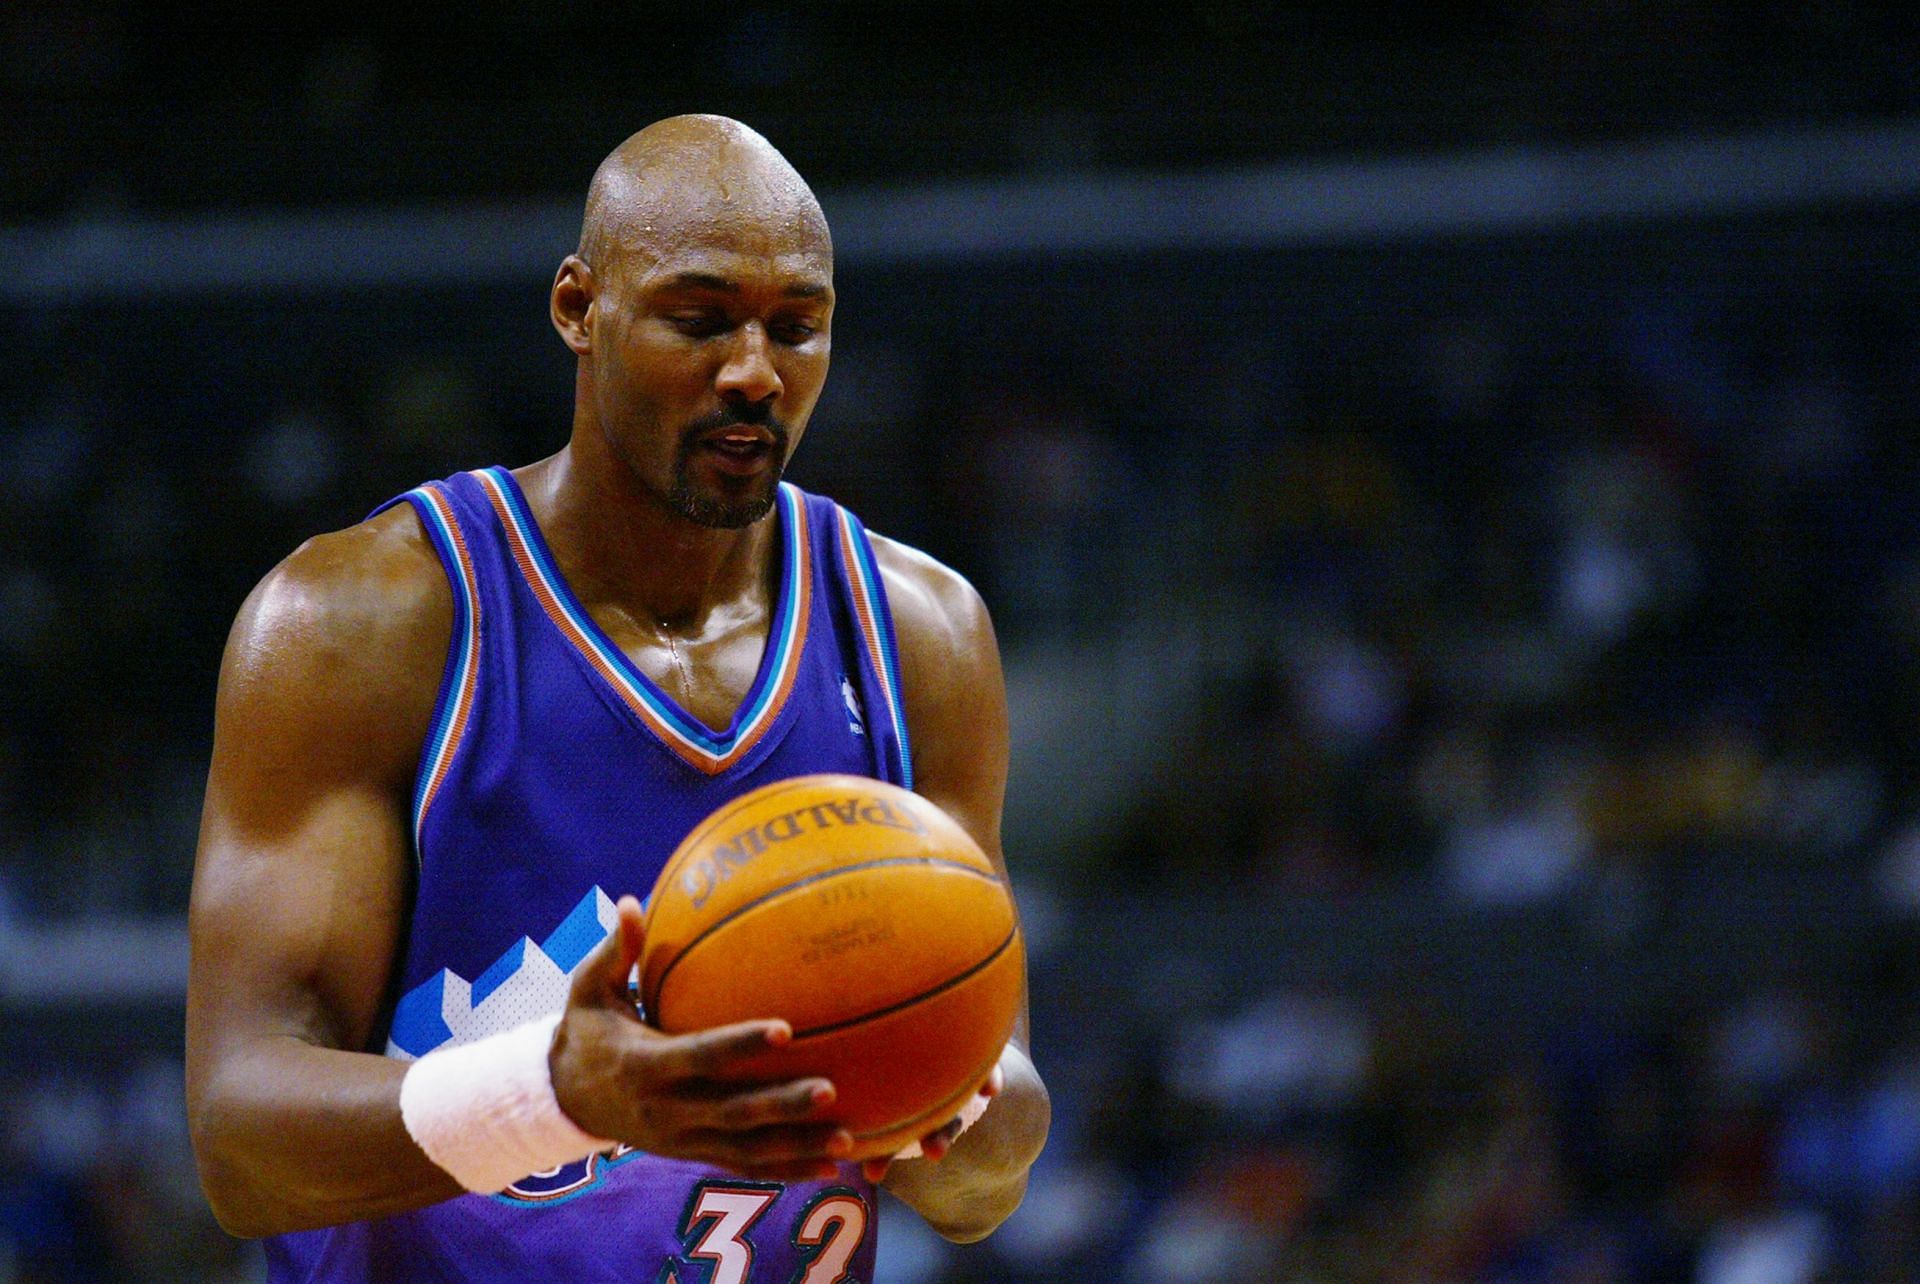 Open Court - Wait, WHAT????! At age 20, Karl Malone had a